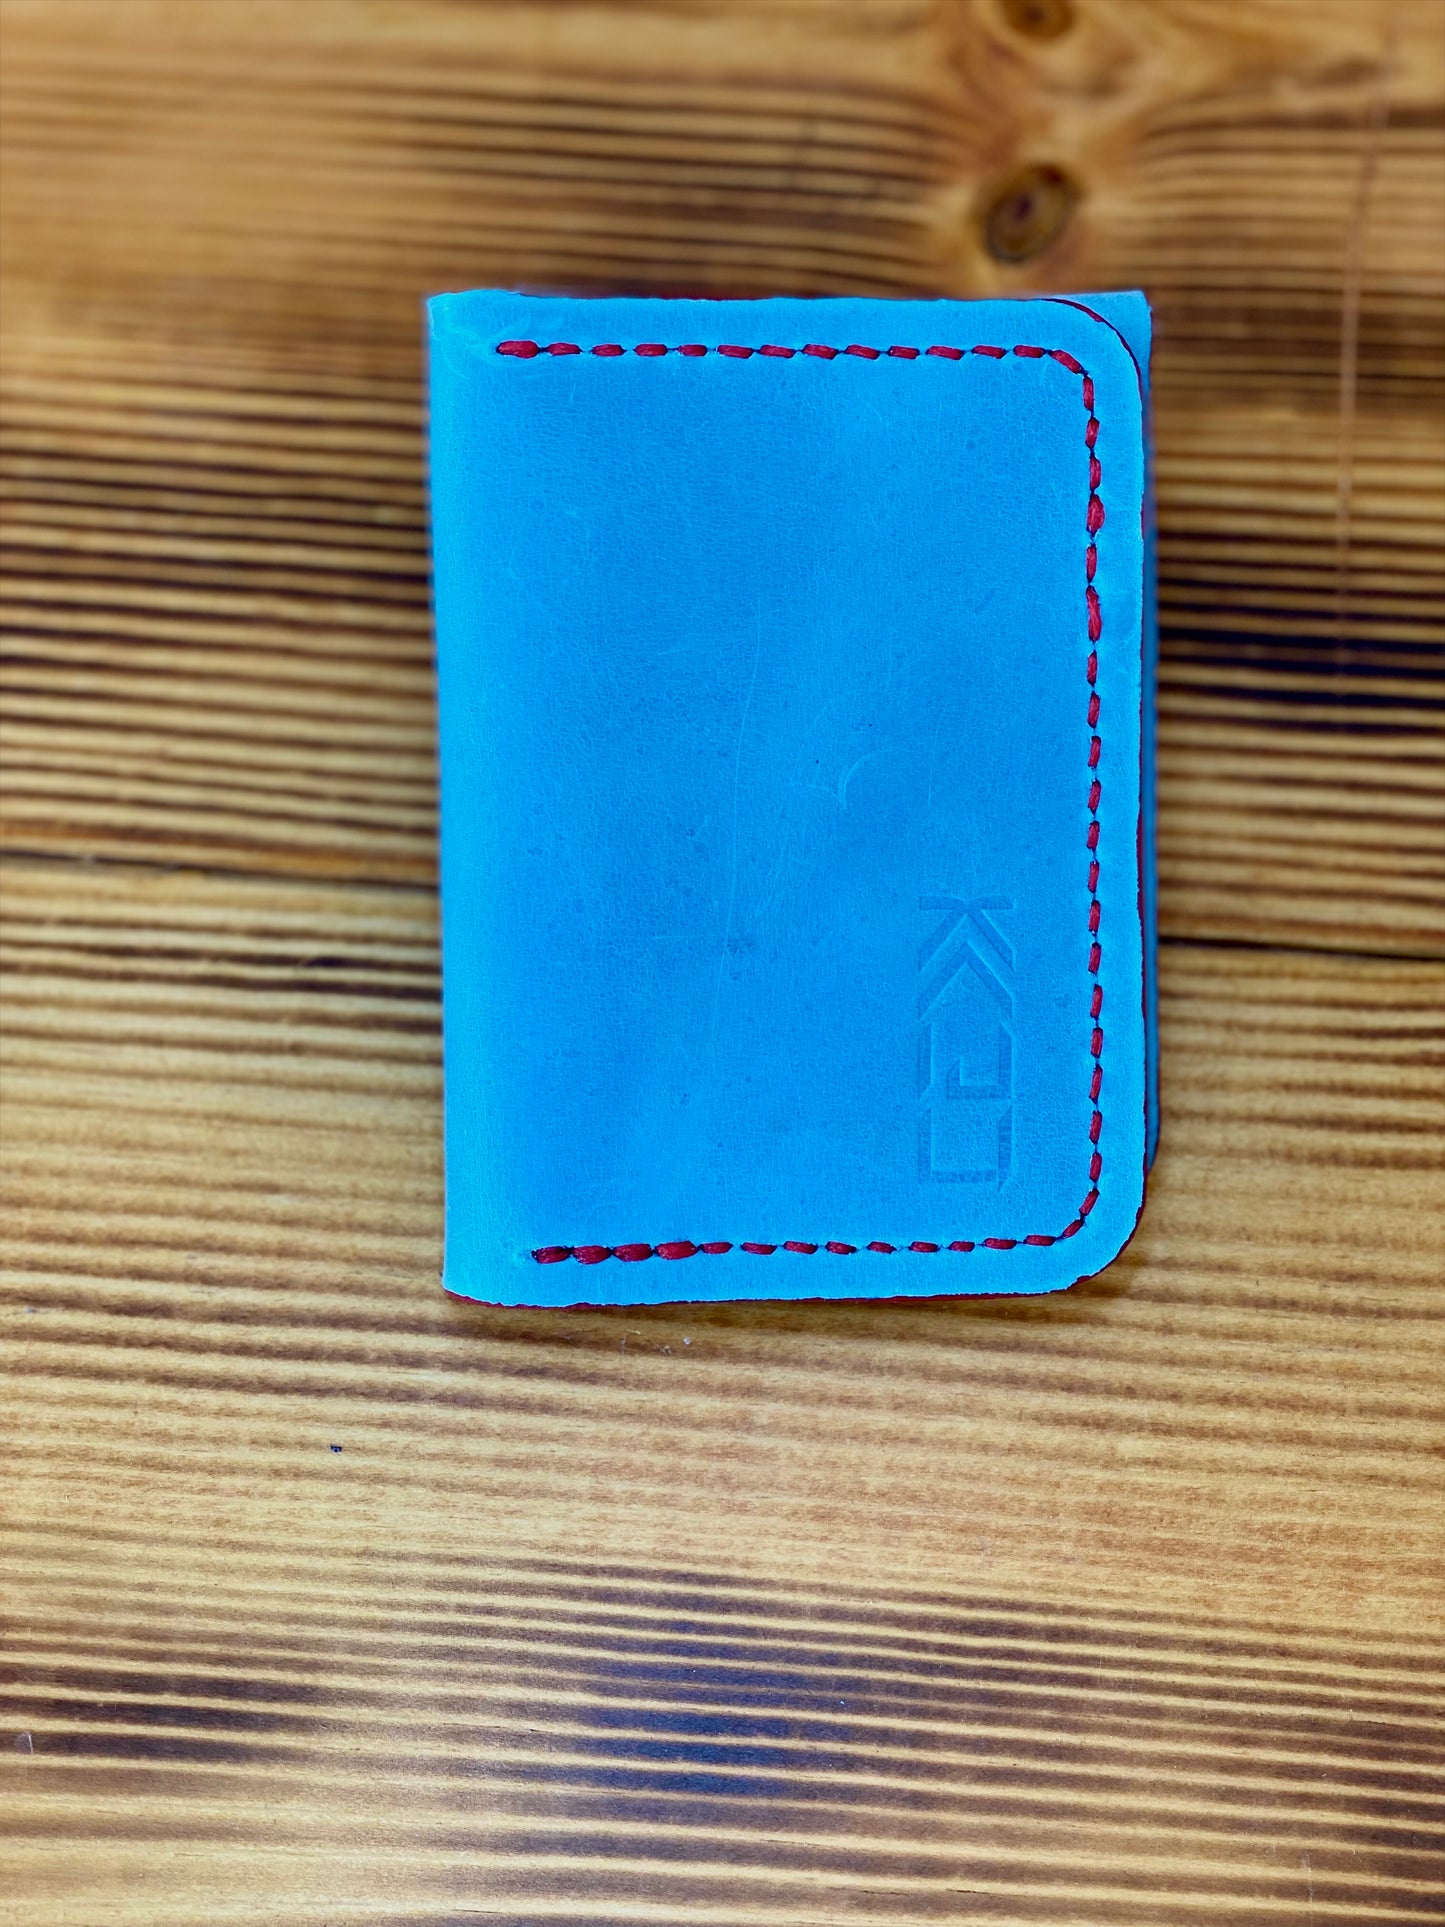 Kaiju Cut and Sew Baby Blue Bi-Fold Vertical Wallet with Money Clip | Handmade in Austin, TX